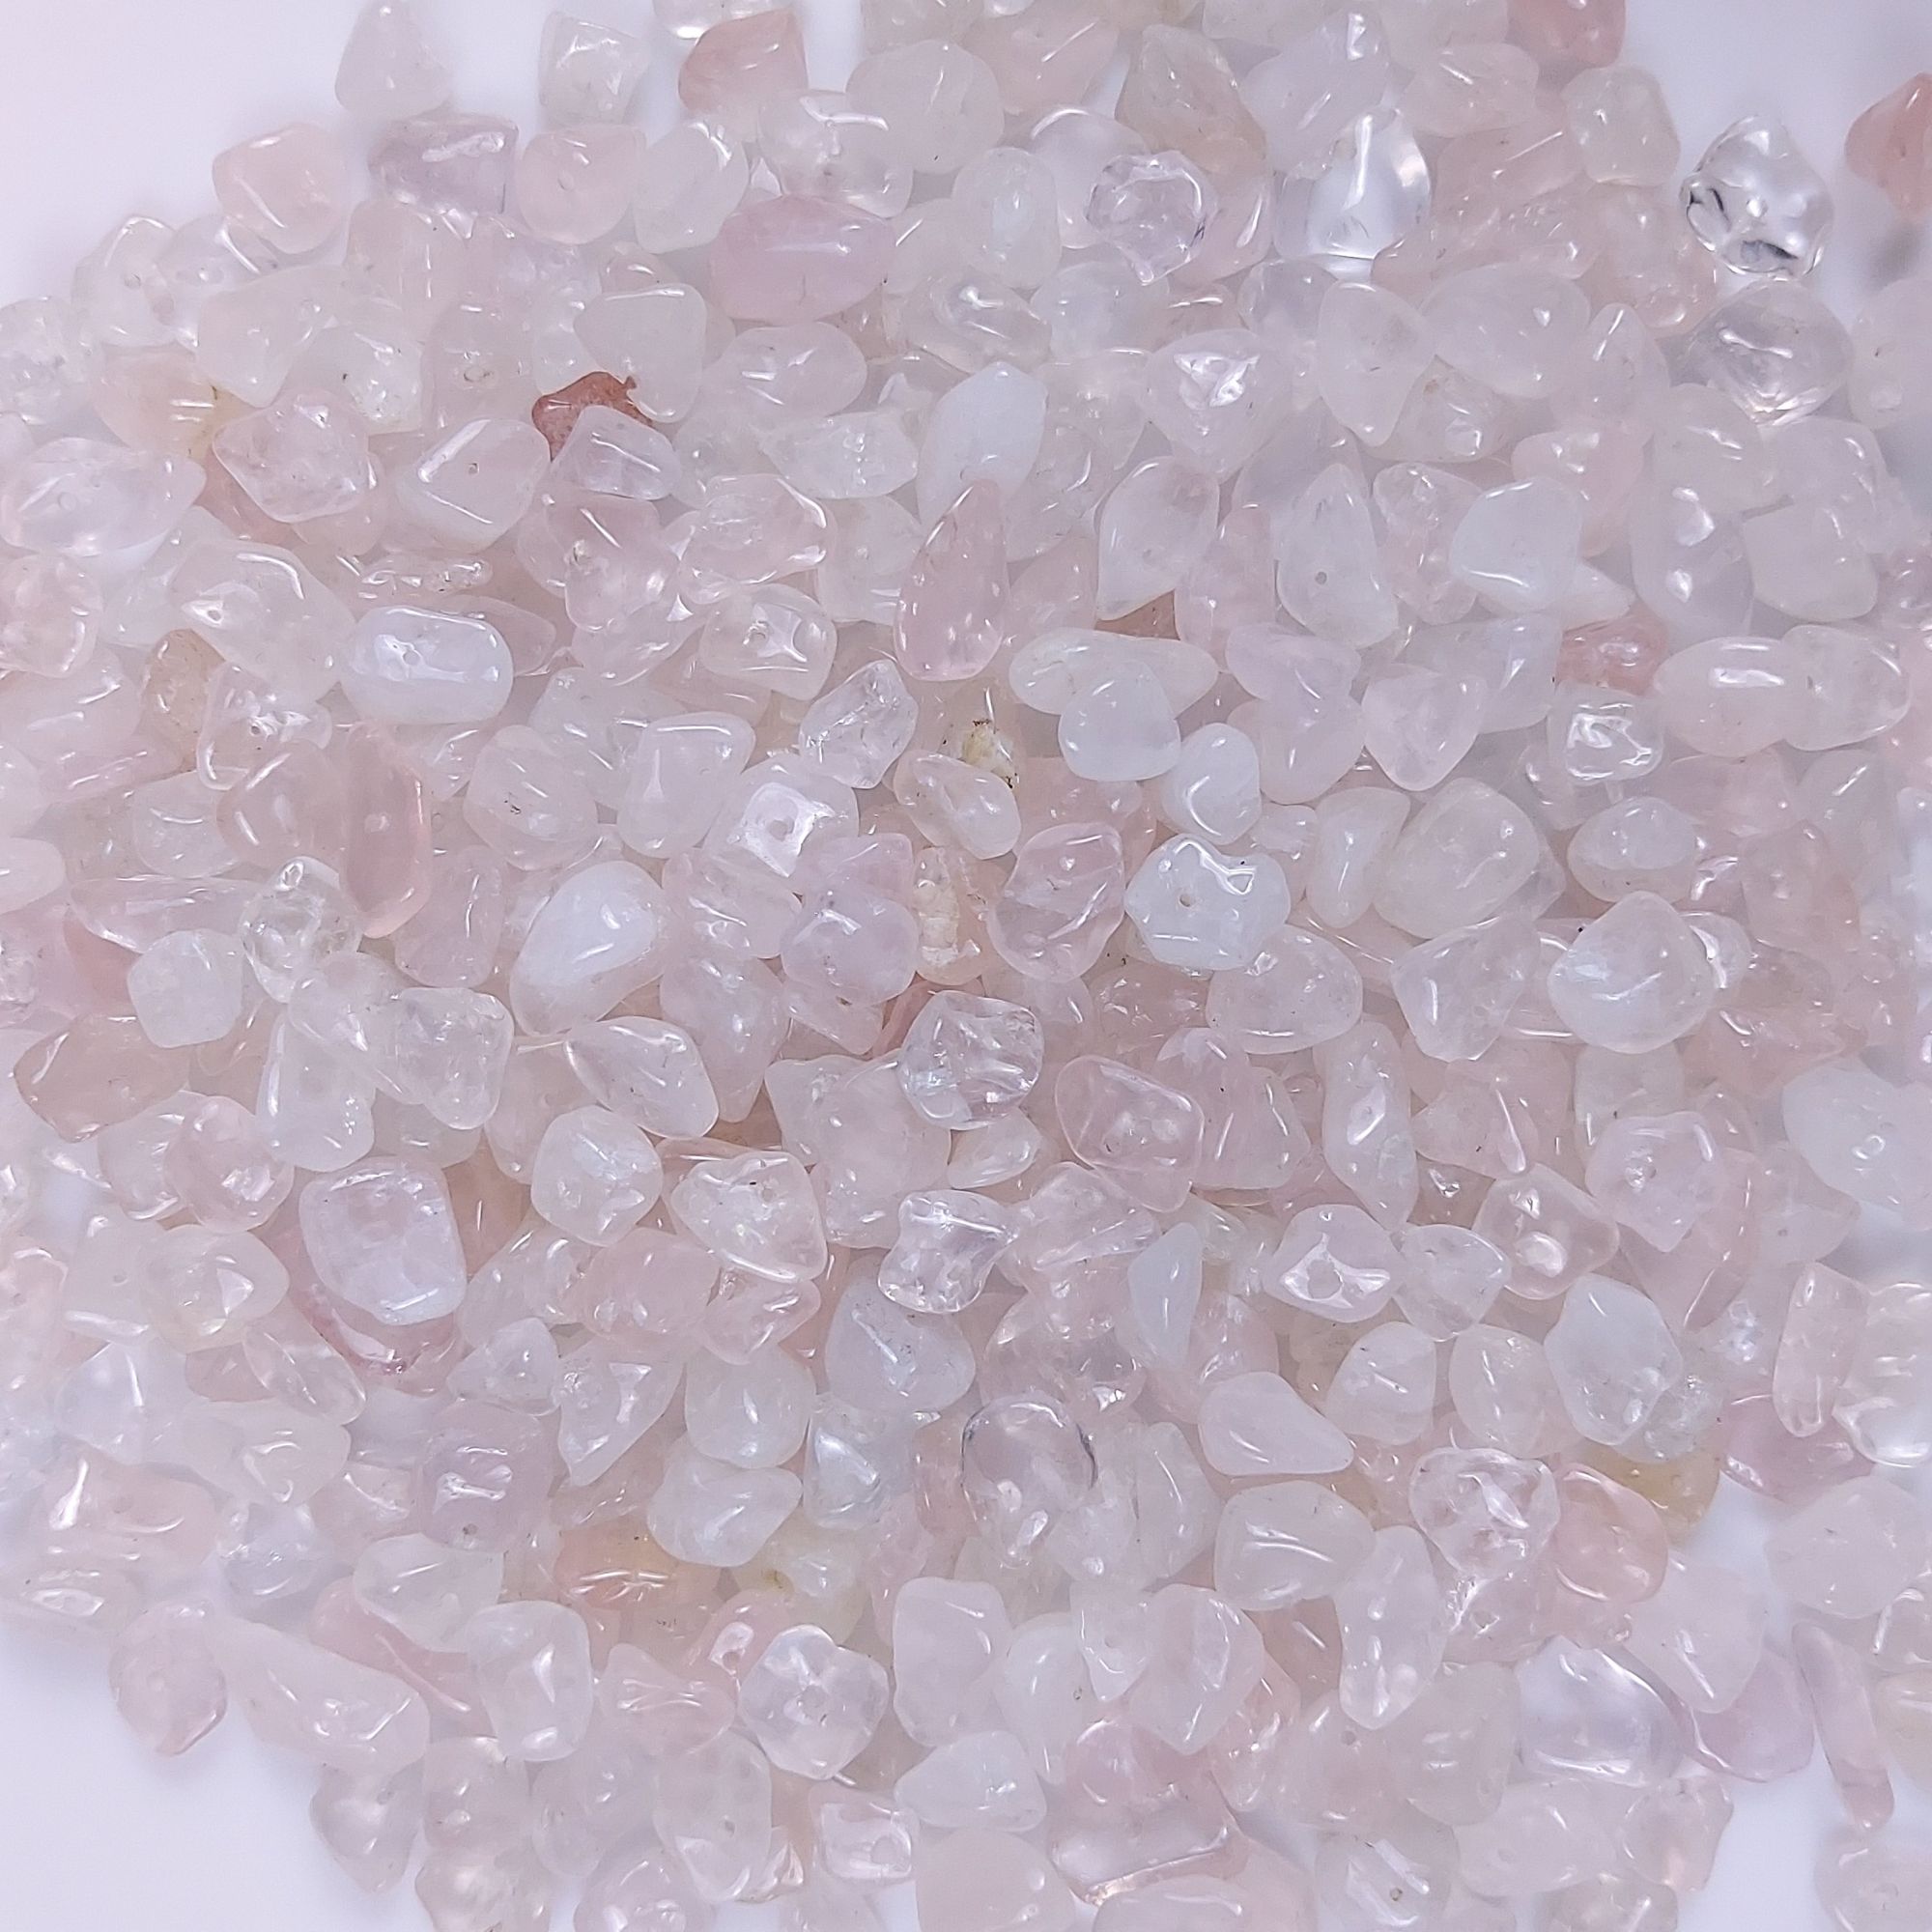 246Pcs 866Cts  Natural Pink Rose Quartz Gemstone Chips Uncut Beads for Jewelry Making Center Drill Loose Gemstones Nuggets Chips Smooth Beads Bracelet Gift for Her 10x4 5x5mm#G-406